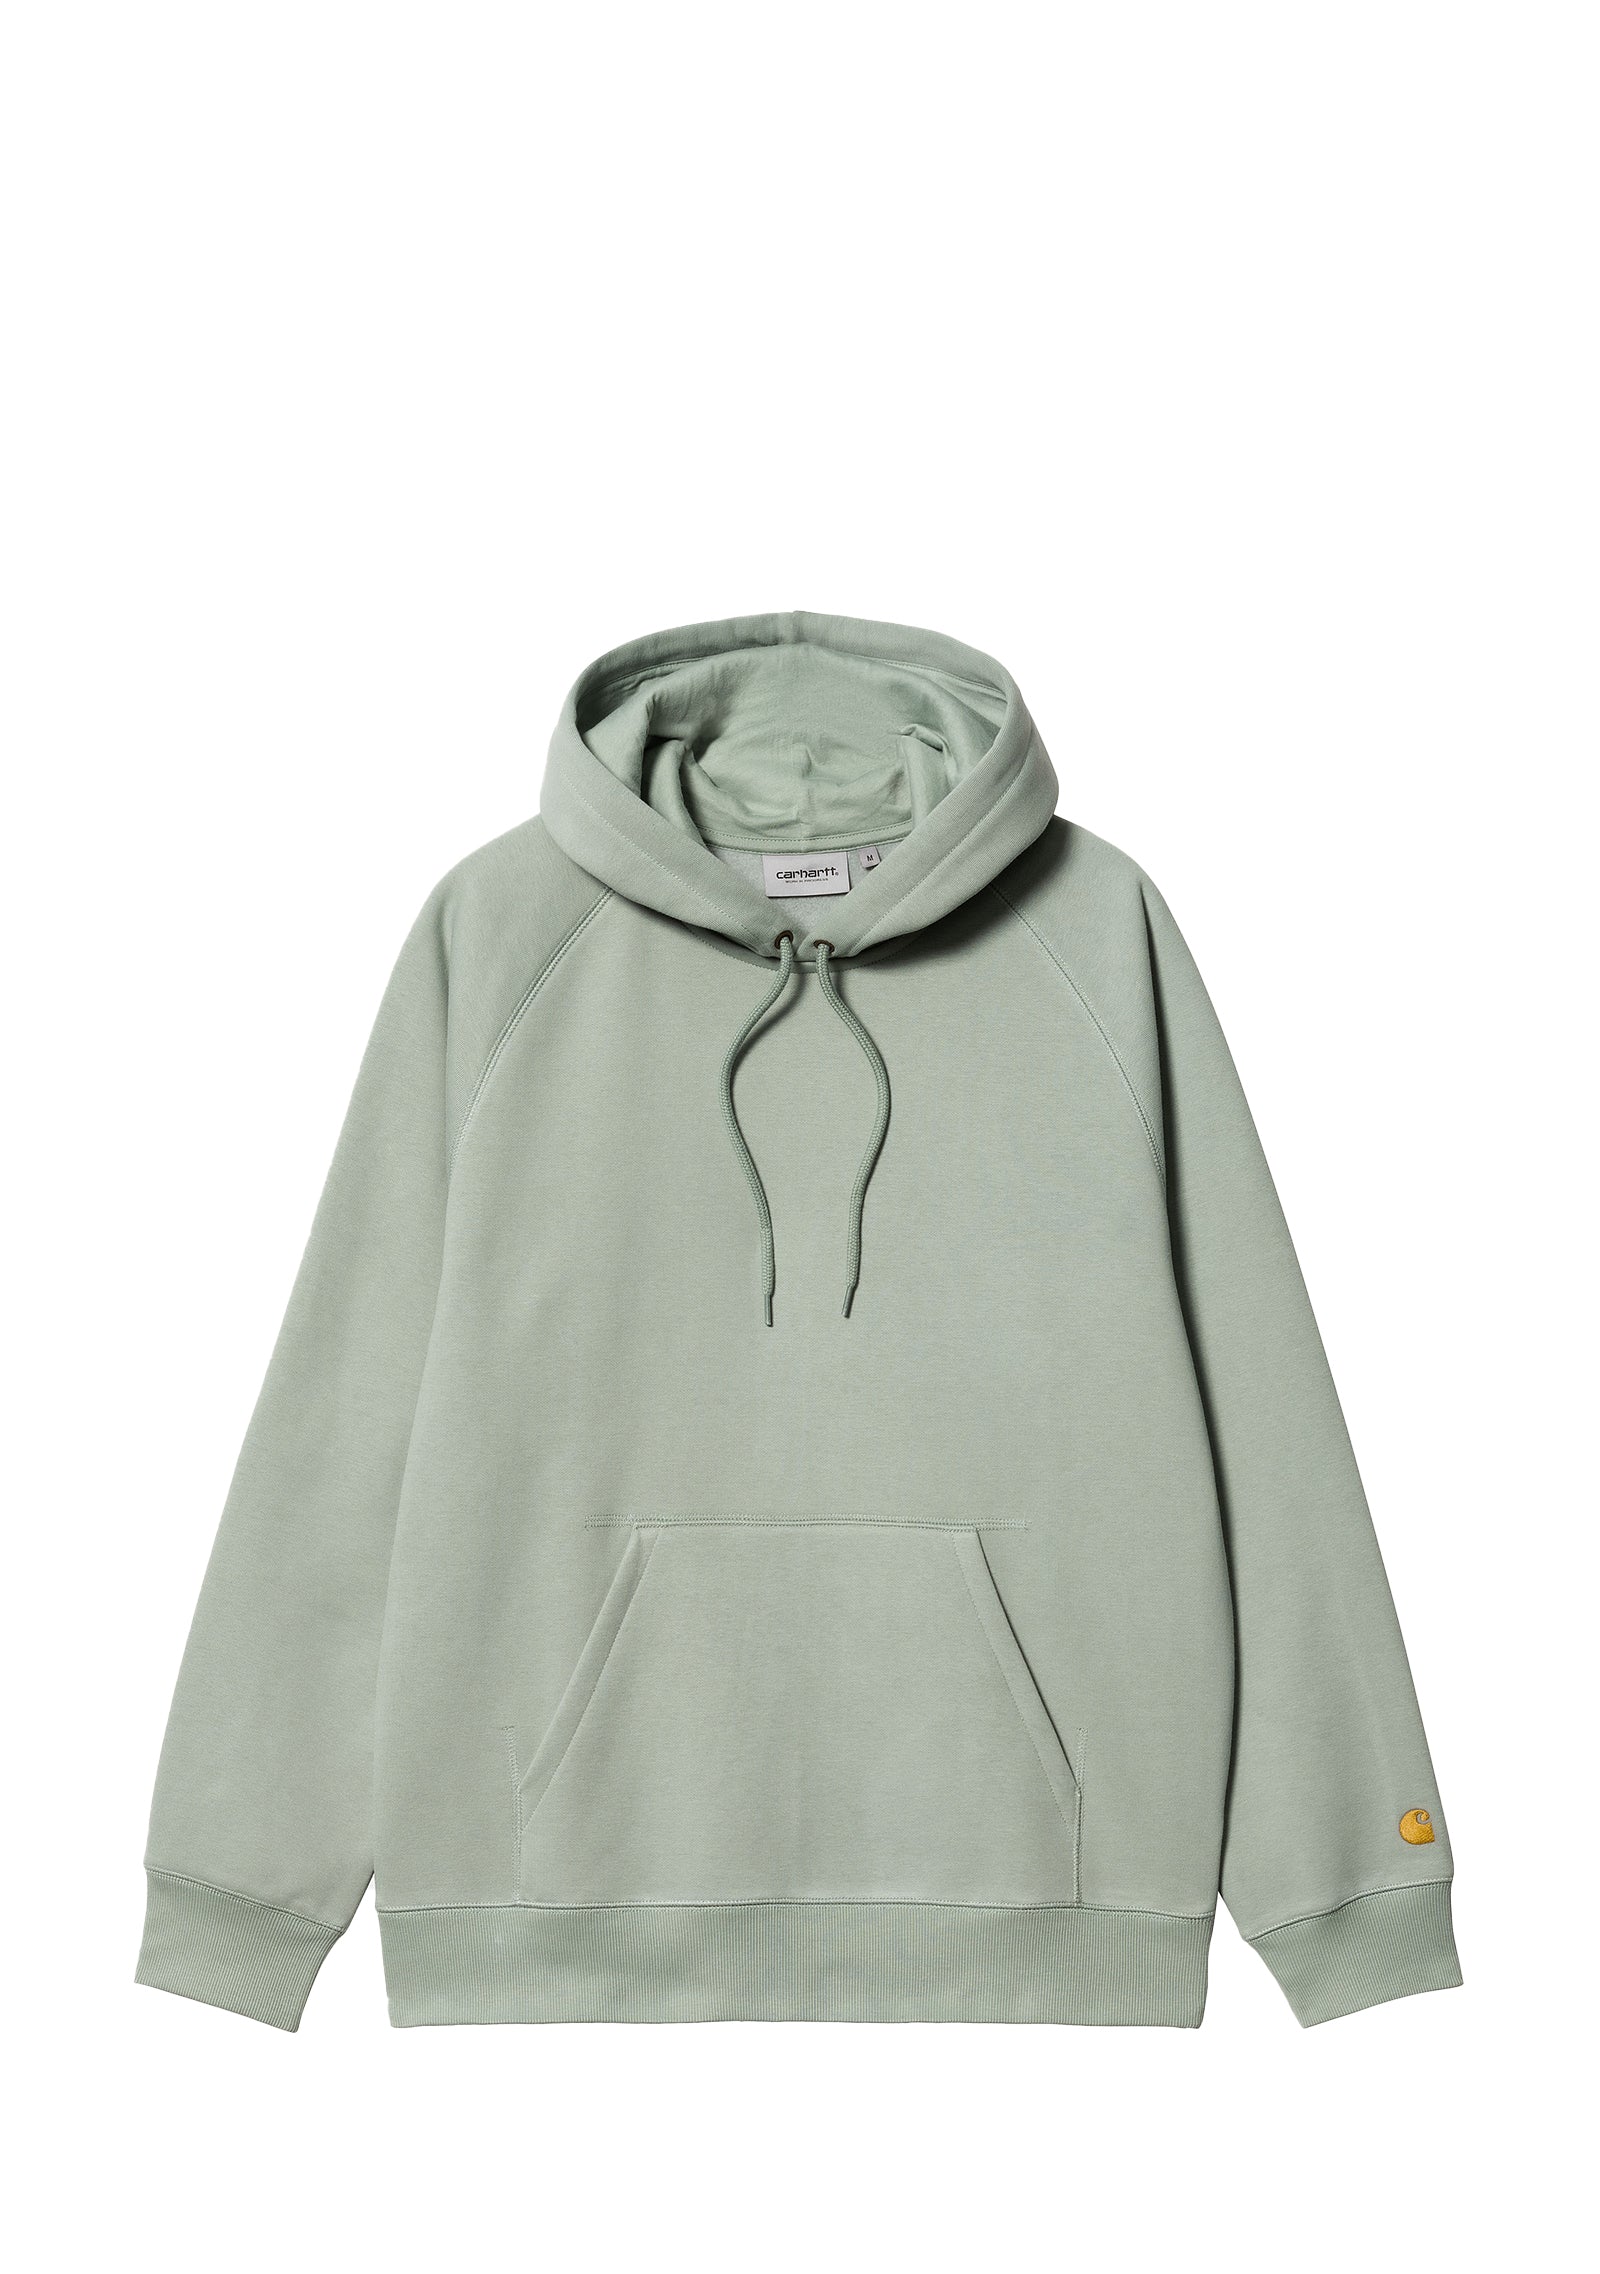 hooded chase sweat cotton/polyester sweat 440g/m